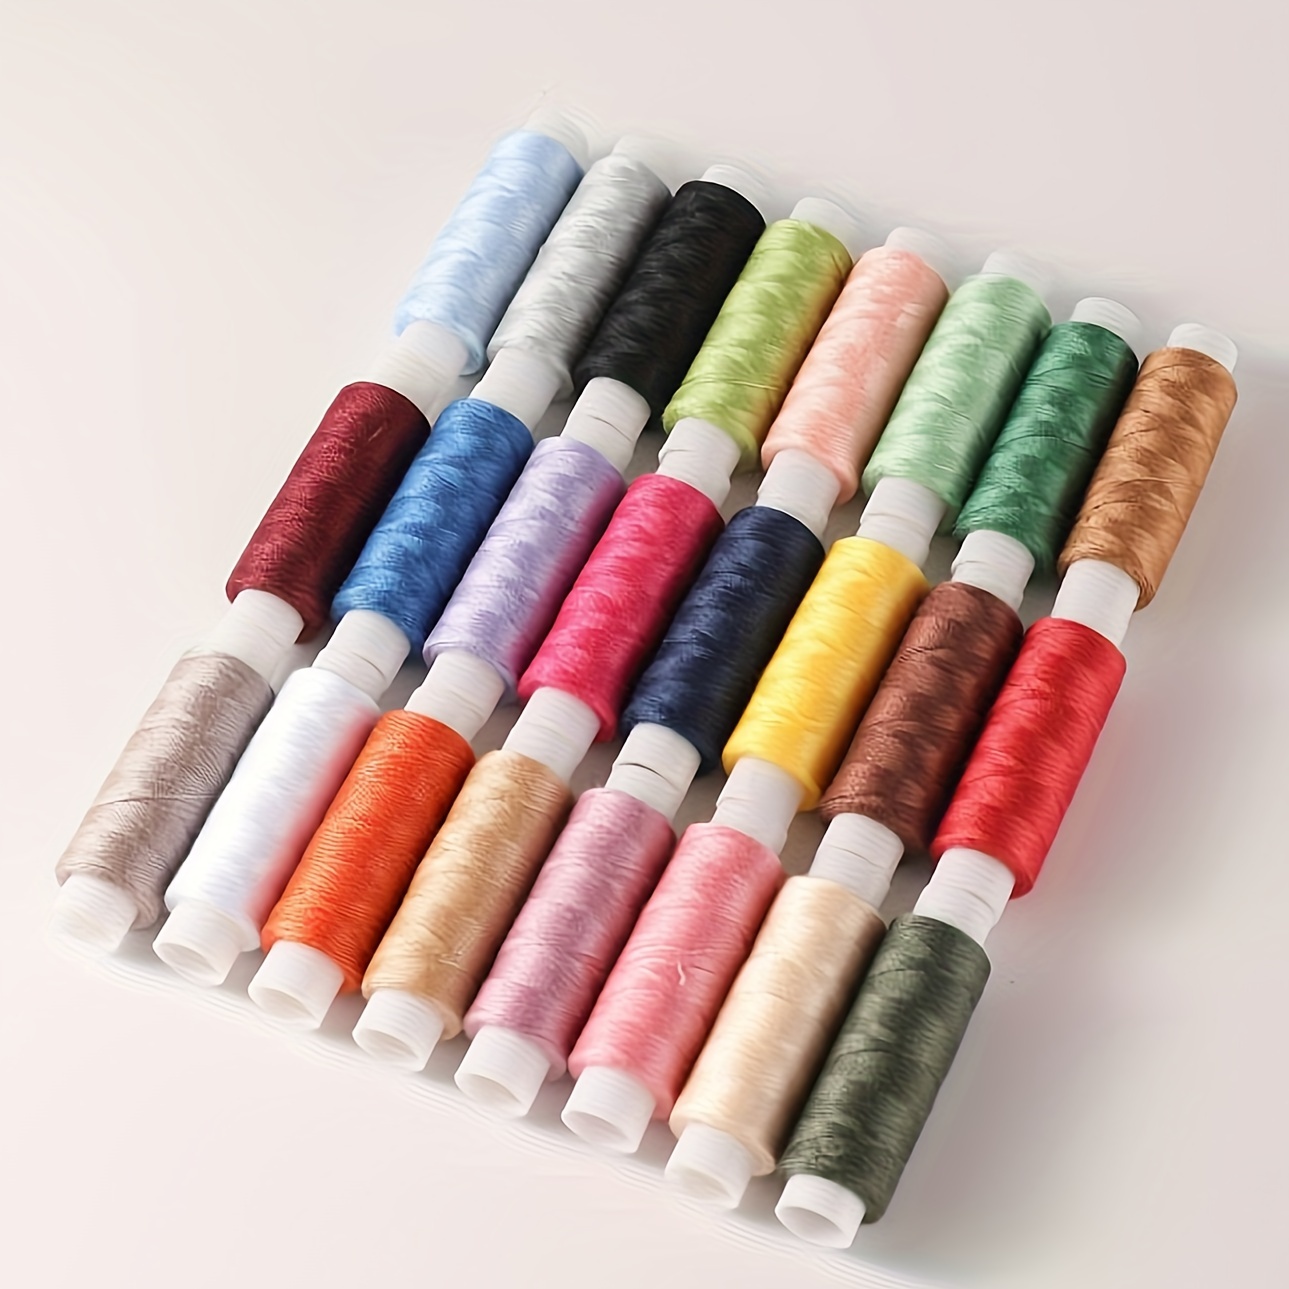 Cotton Sewing Thread 24 Colors Cotton Thread Sets Spools Threads Household  